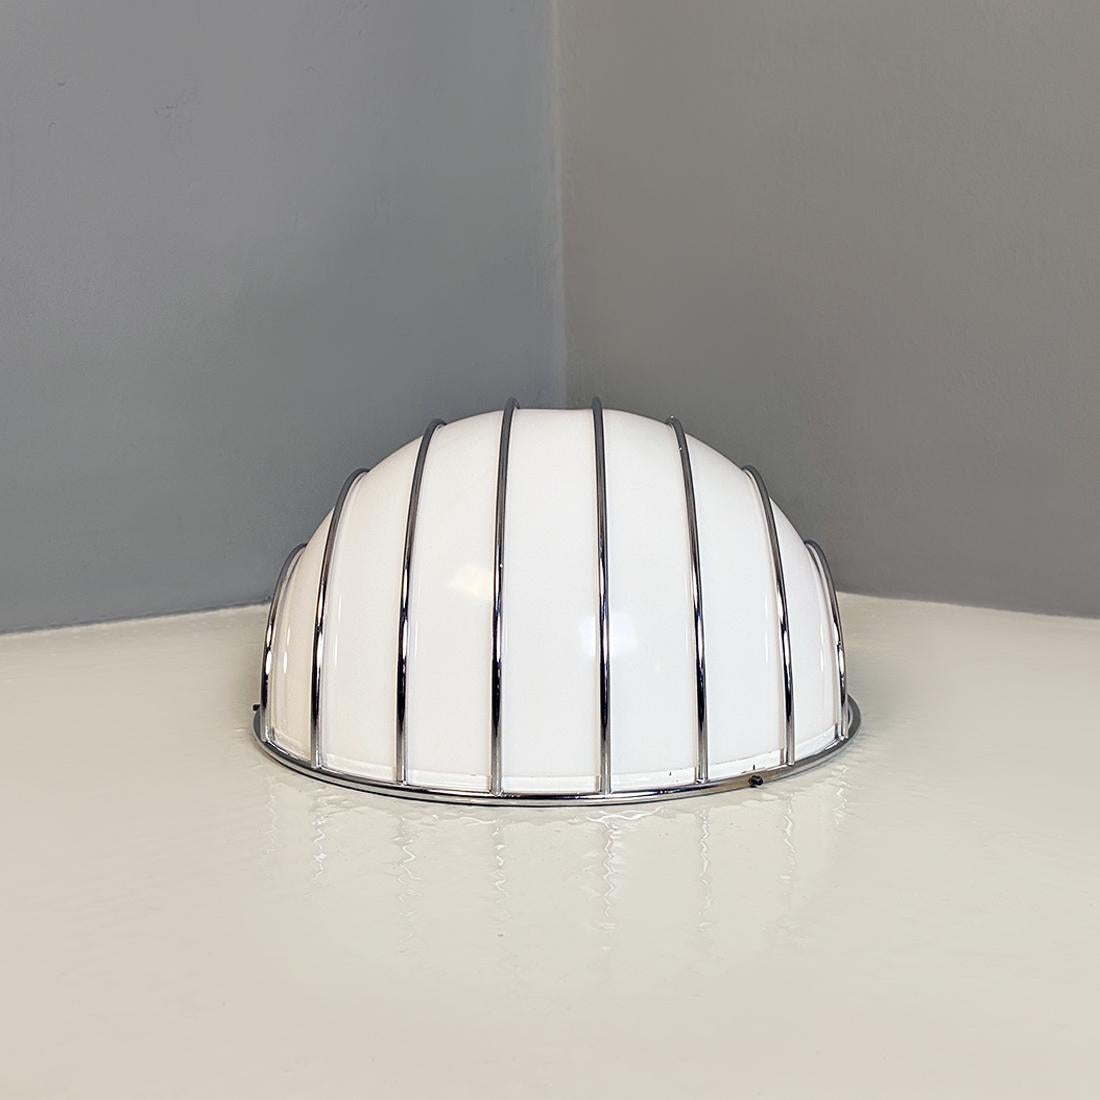 Italian Modern Metal Rod Structure and White Plastic Lampshade Wall Lamp, 1970s For Sale 7